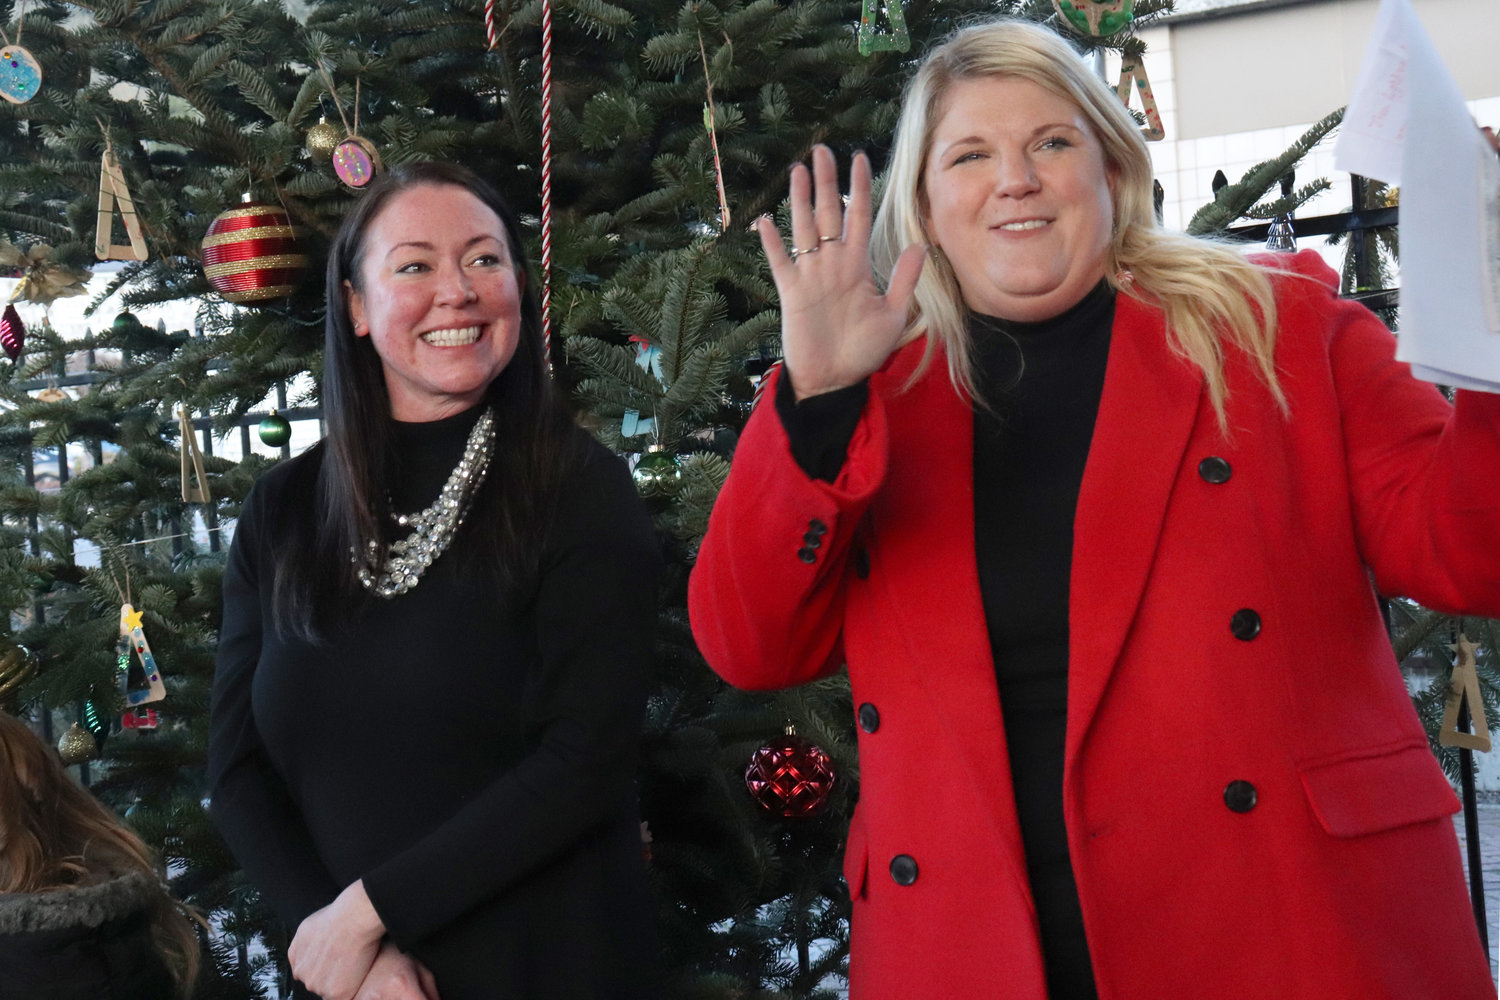 Chehalis City Councilor Kate McDougall and Experience Chehalis Executive Director Annalee Tobey stand in front of the City of Chehalis’ Christmas tree outside of the Lewis County Historical Museum on Saturday.